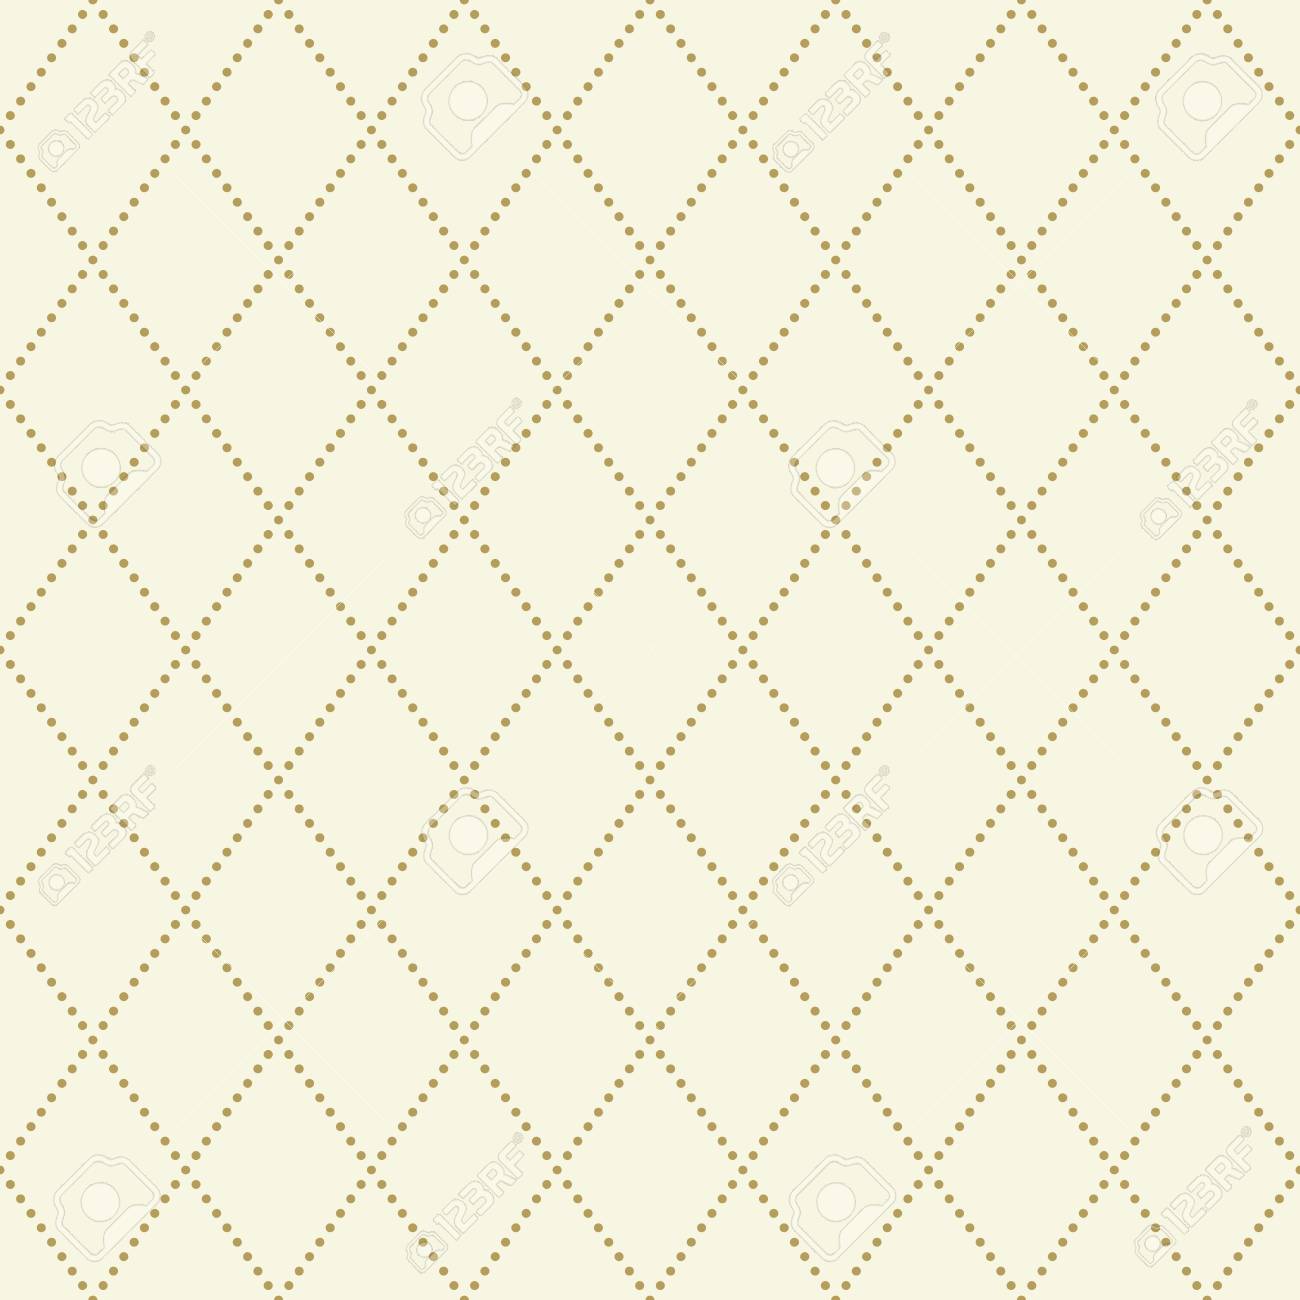 Geometric Dotted Vector Golden Pattern Seamless Abstract Modern